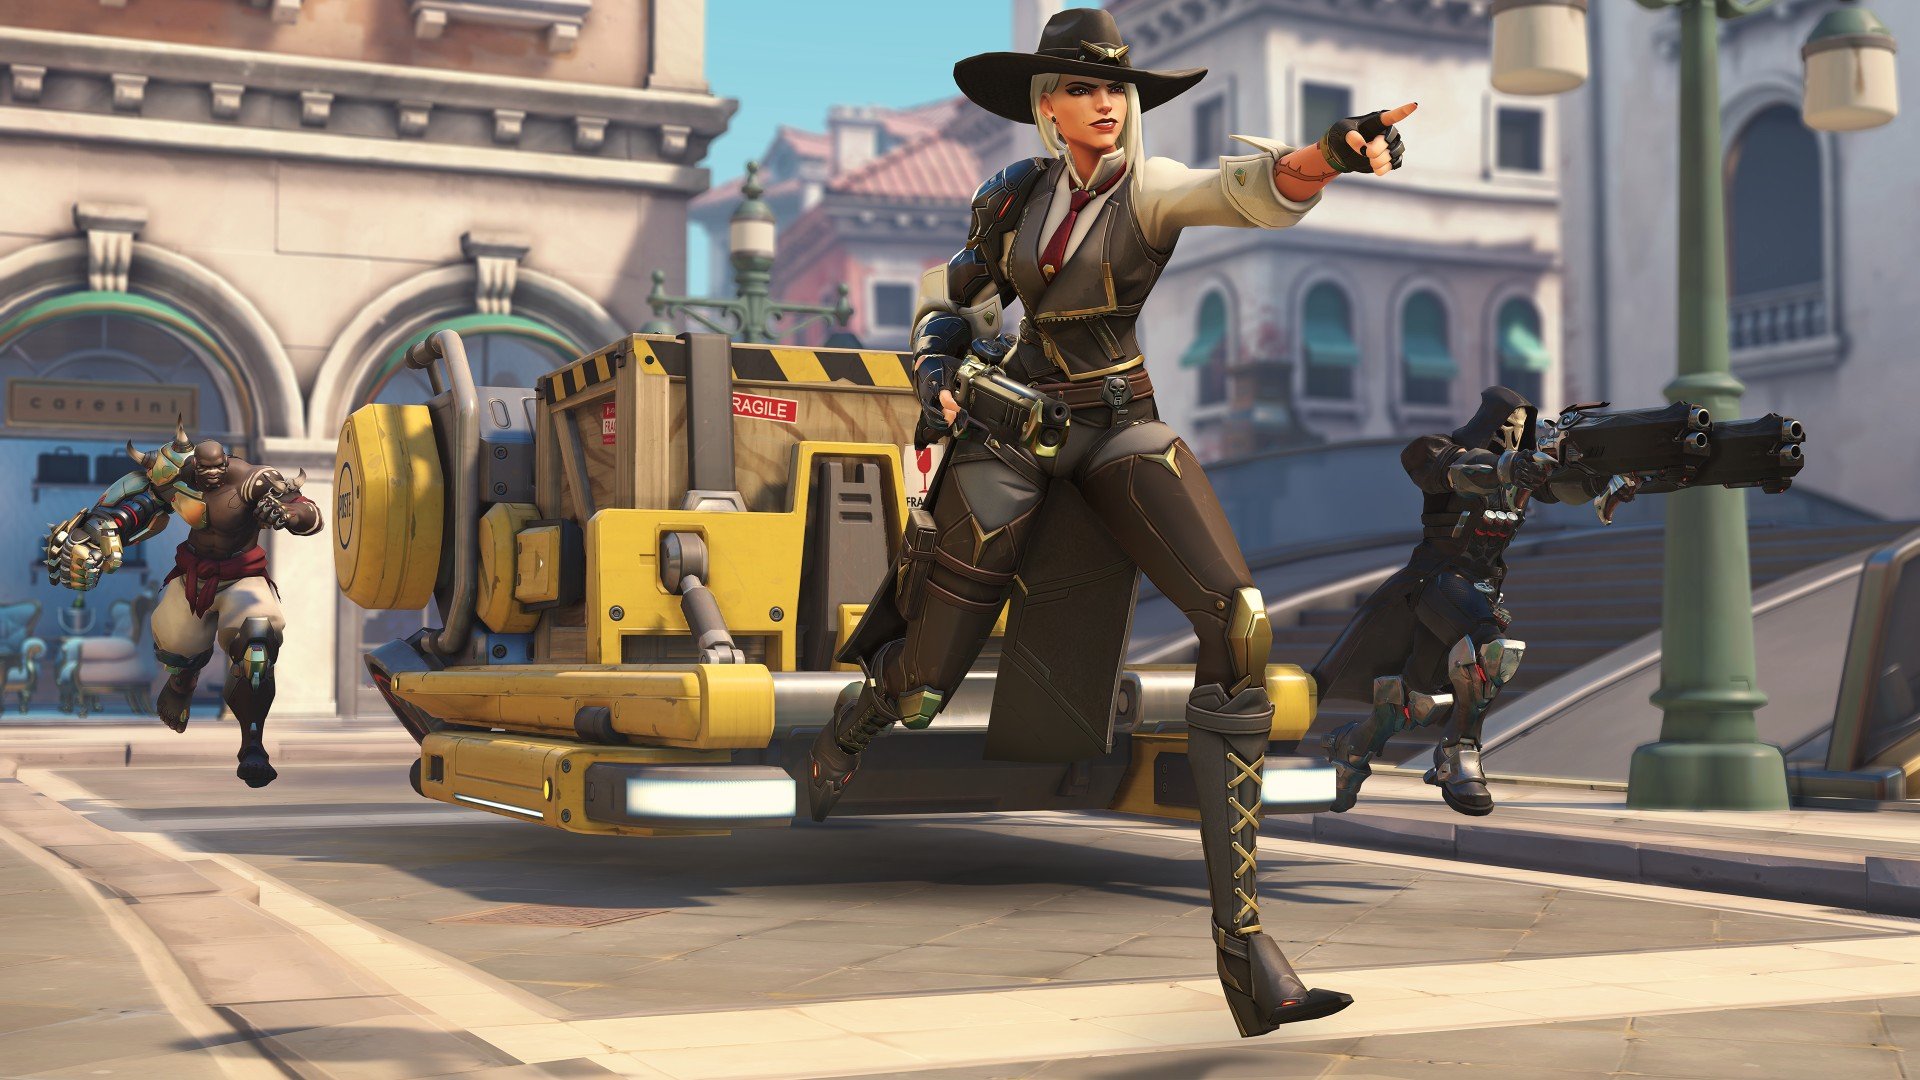 Play Overwatch Free Trial with Xbox Live Gold November 20 to 26 OVR_Ashe_0120.jpg